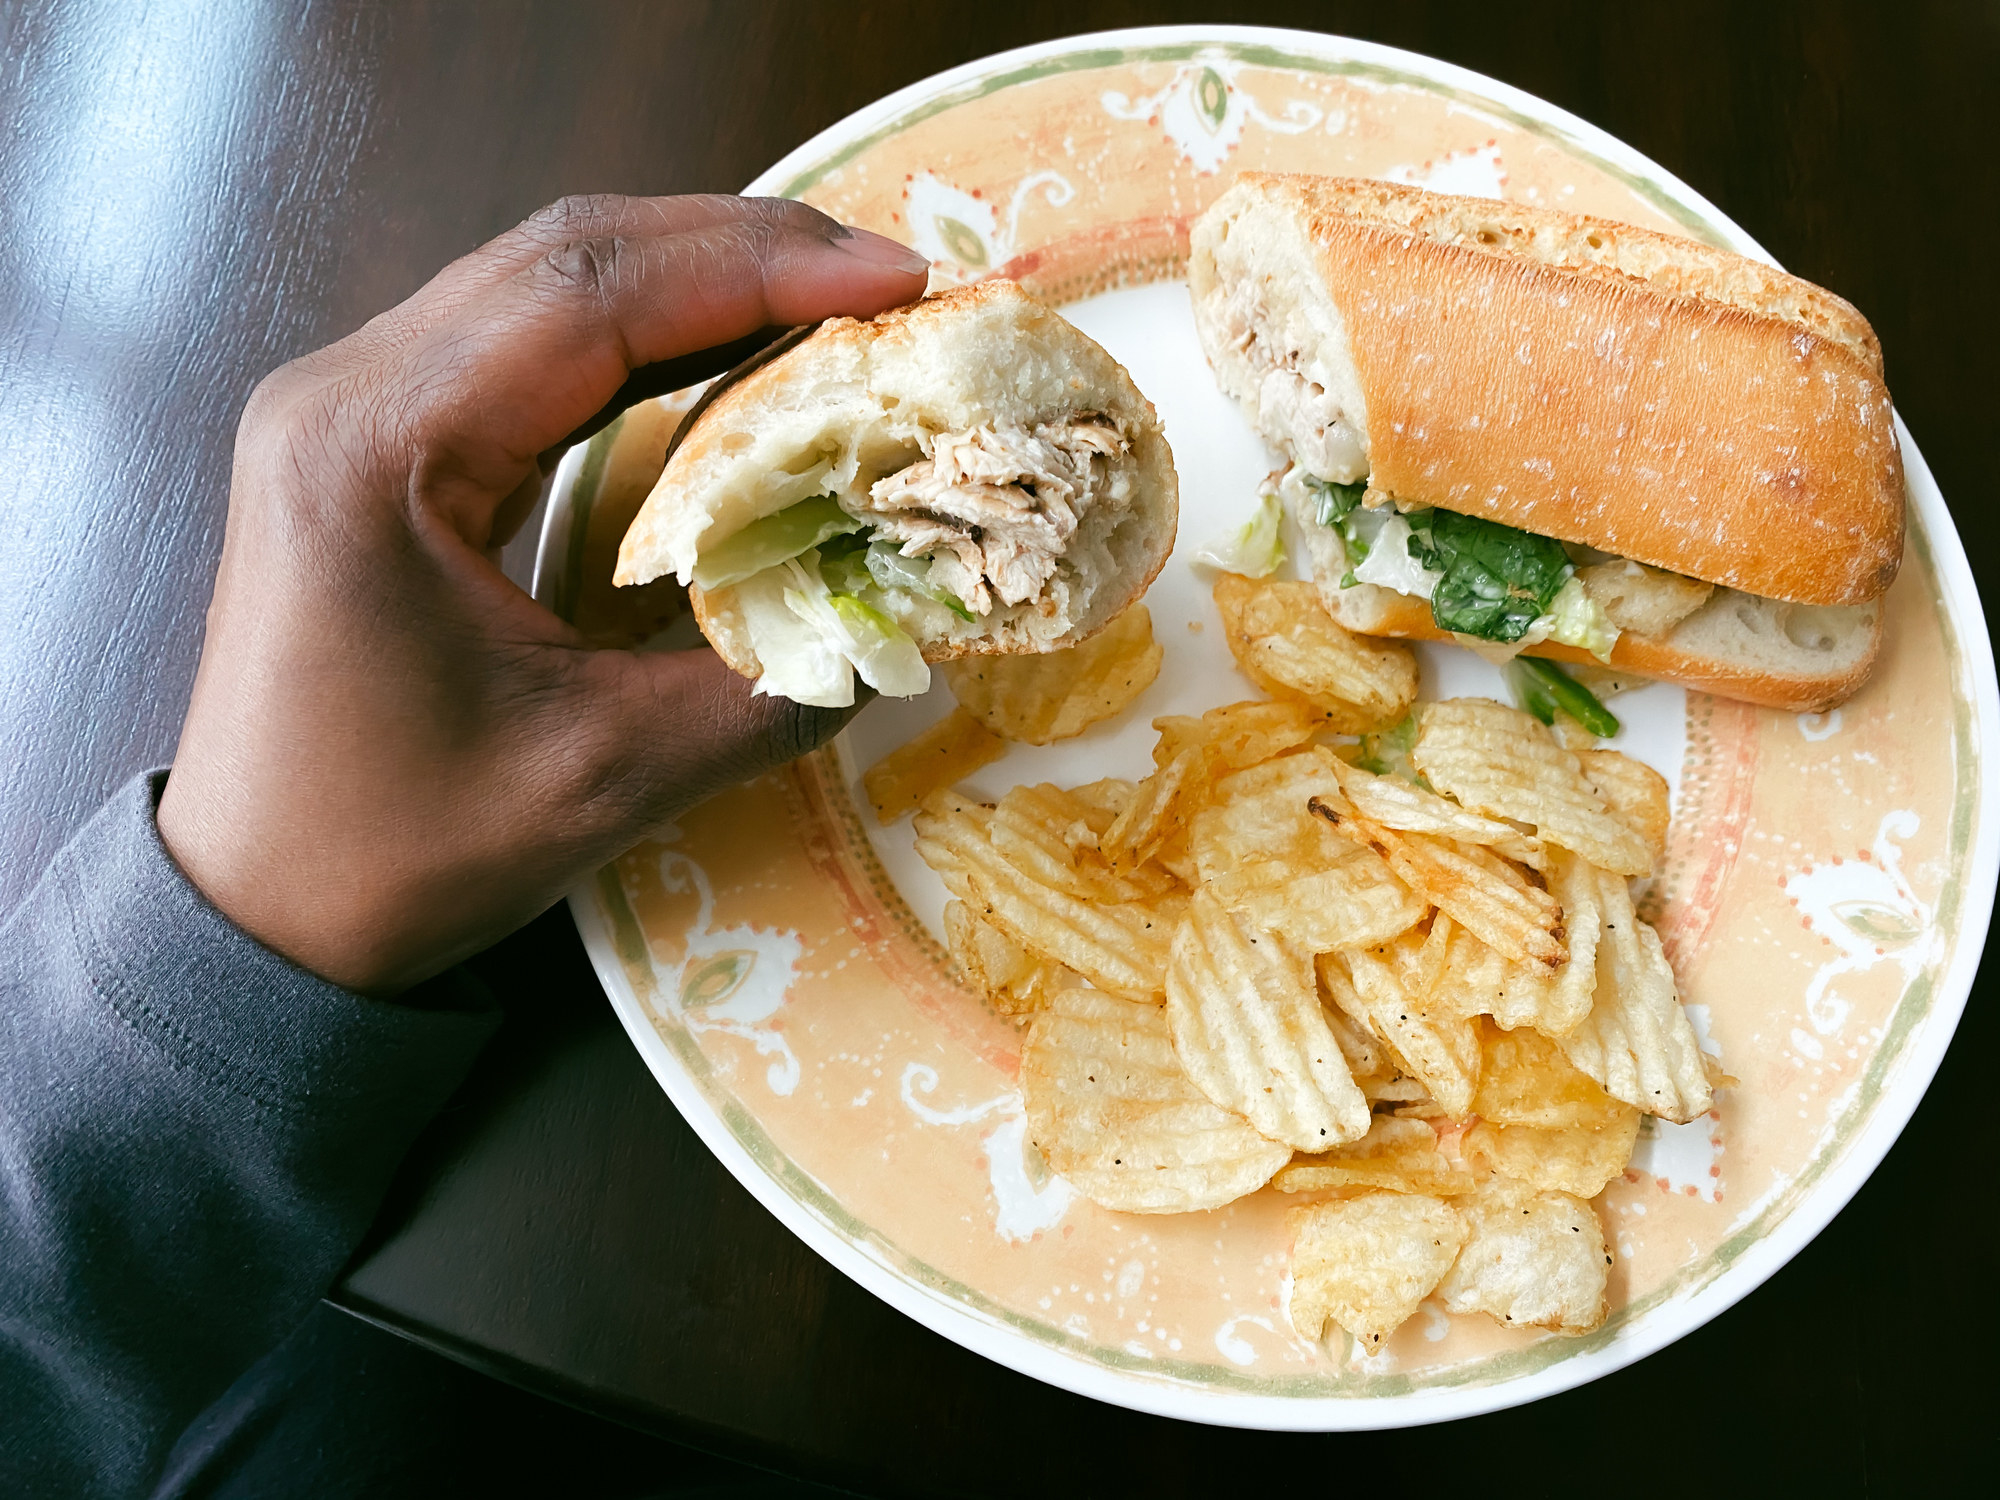 Woman Eats Chicken Sandwich With Side of Chips